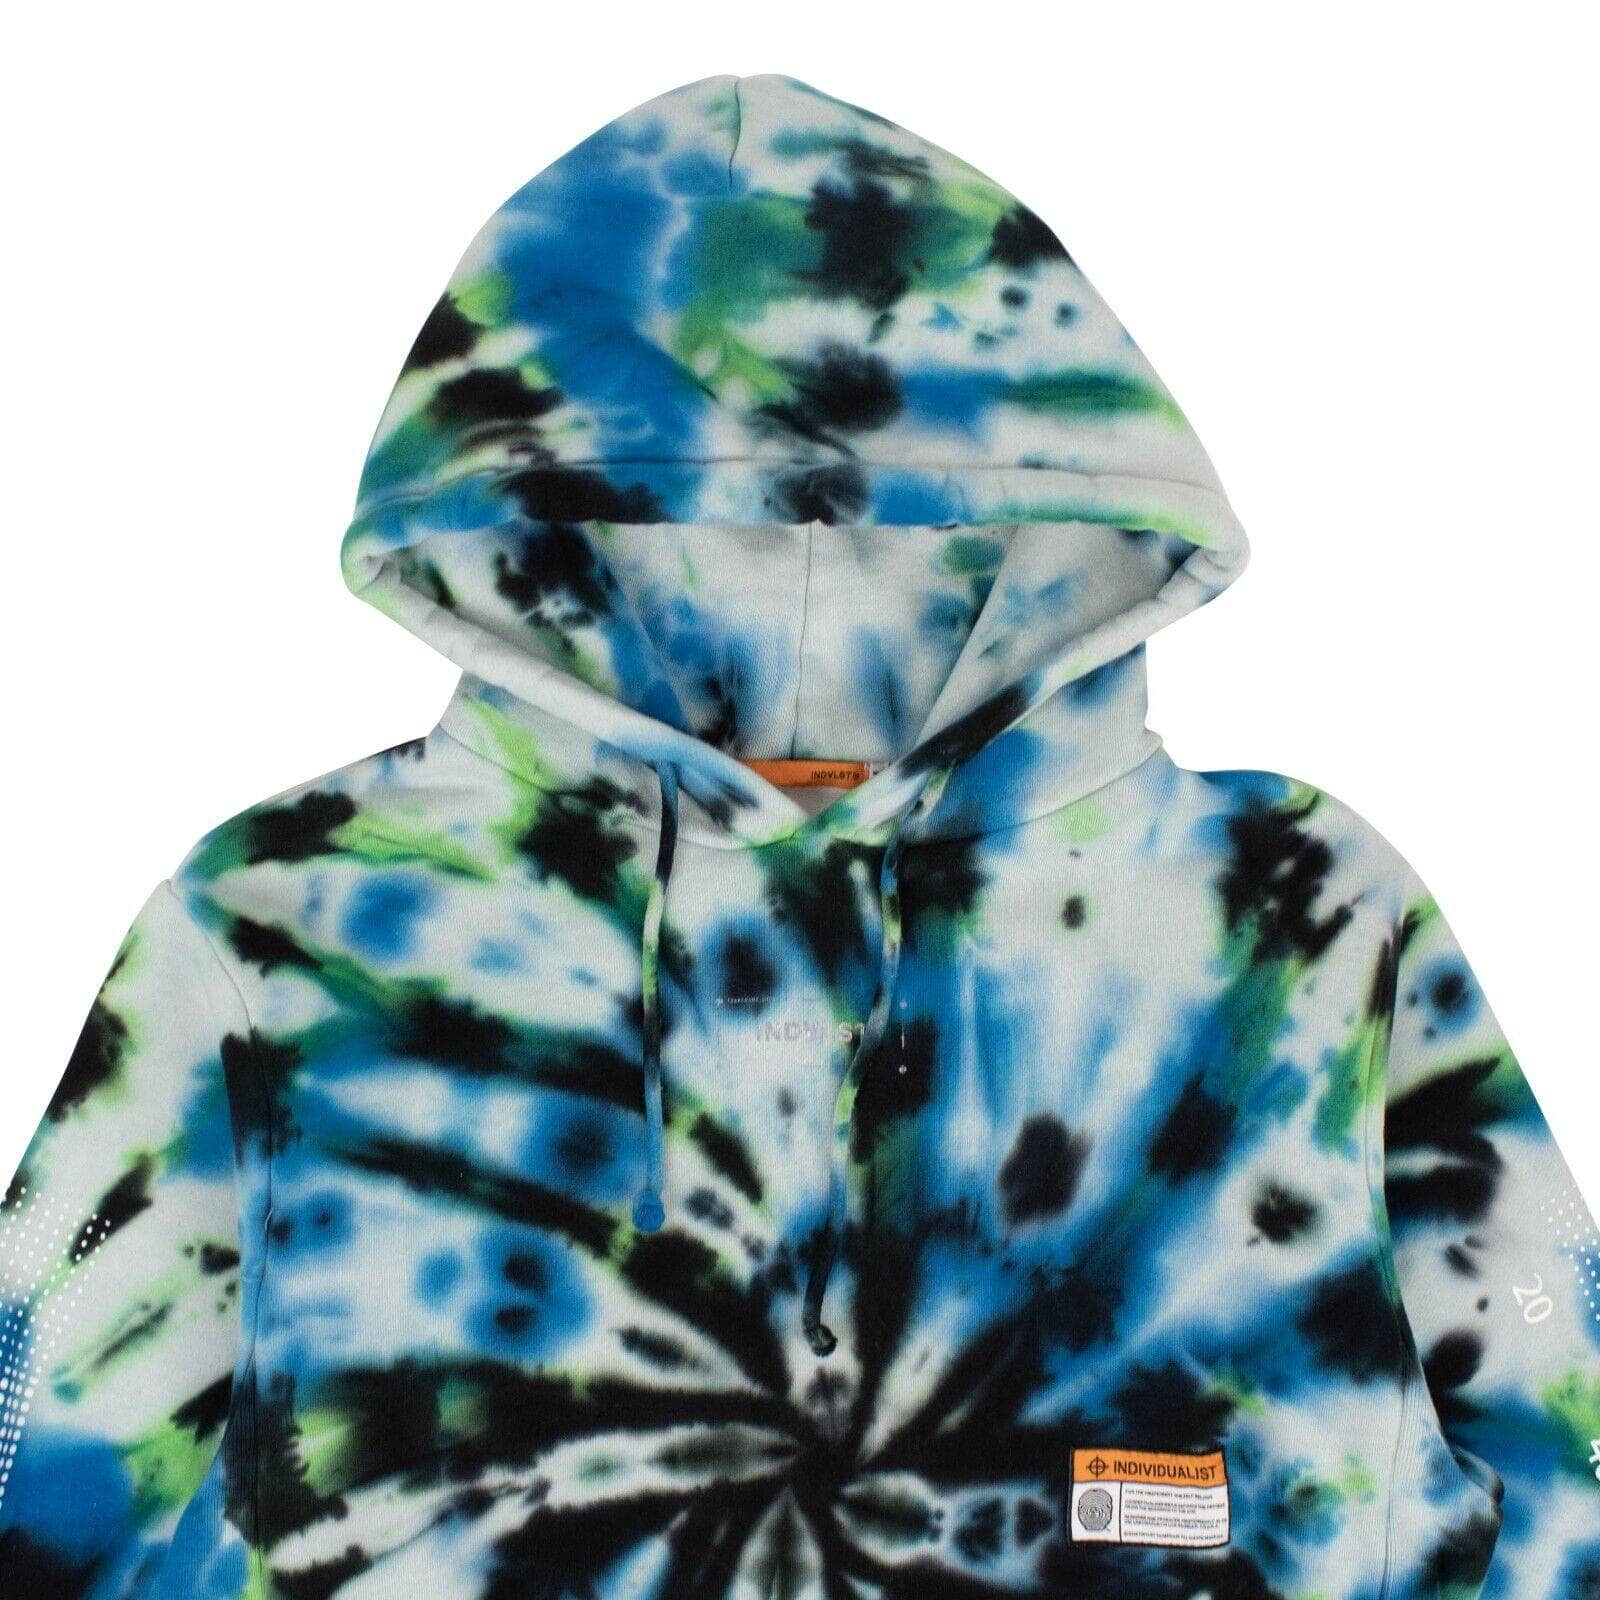 Indvlst channelenable-all, chicmi, couponcollection, gender-mens, indvlst, main-clothing, mens-shoes, MixedApparel, size-l, size-m, size-xl, size-xxl, under-250 Multi Tie Dye Test Bar Logo Hoodie